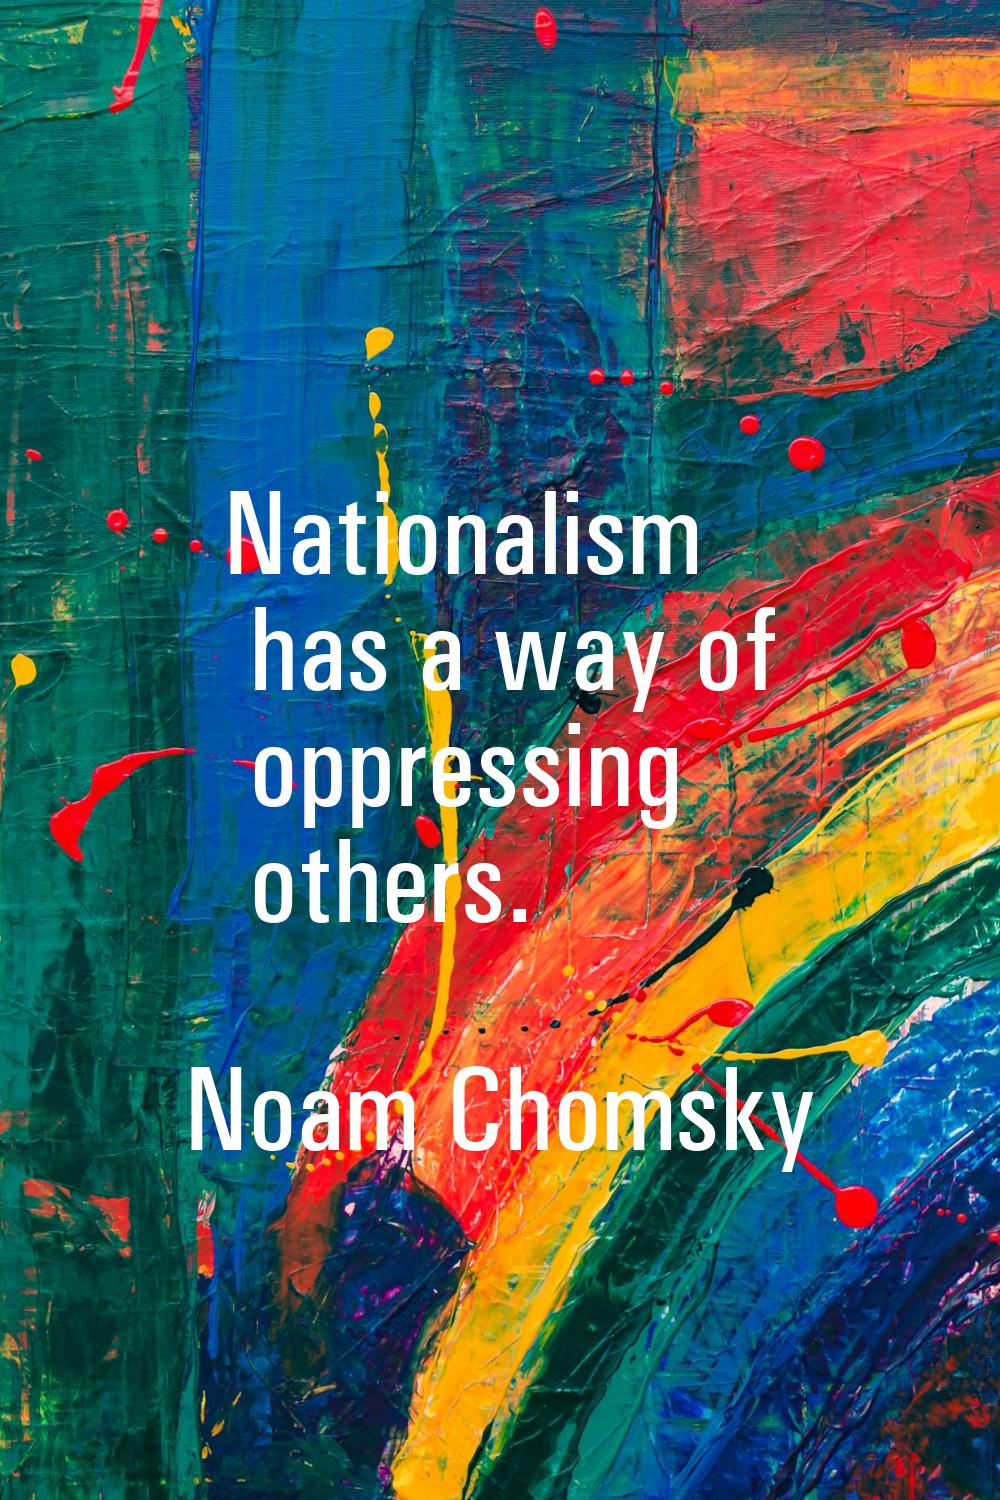 Nationalism has a way of oppressing others.